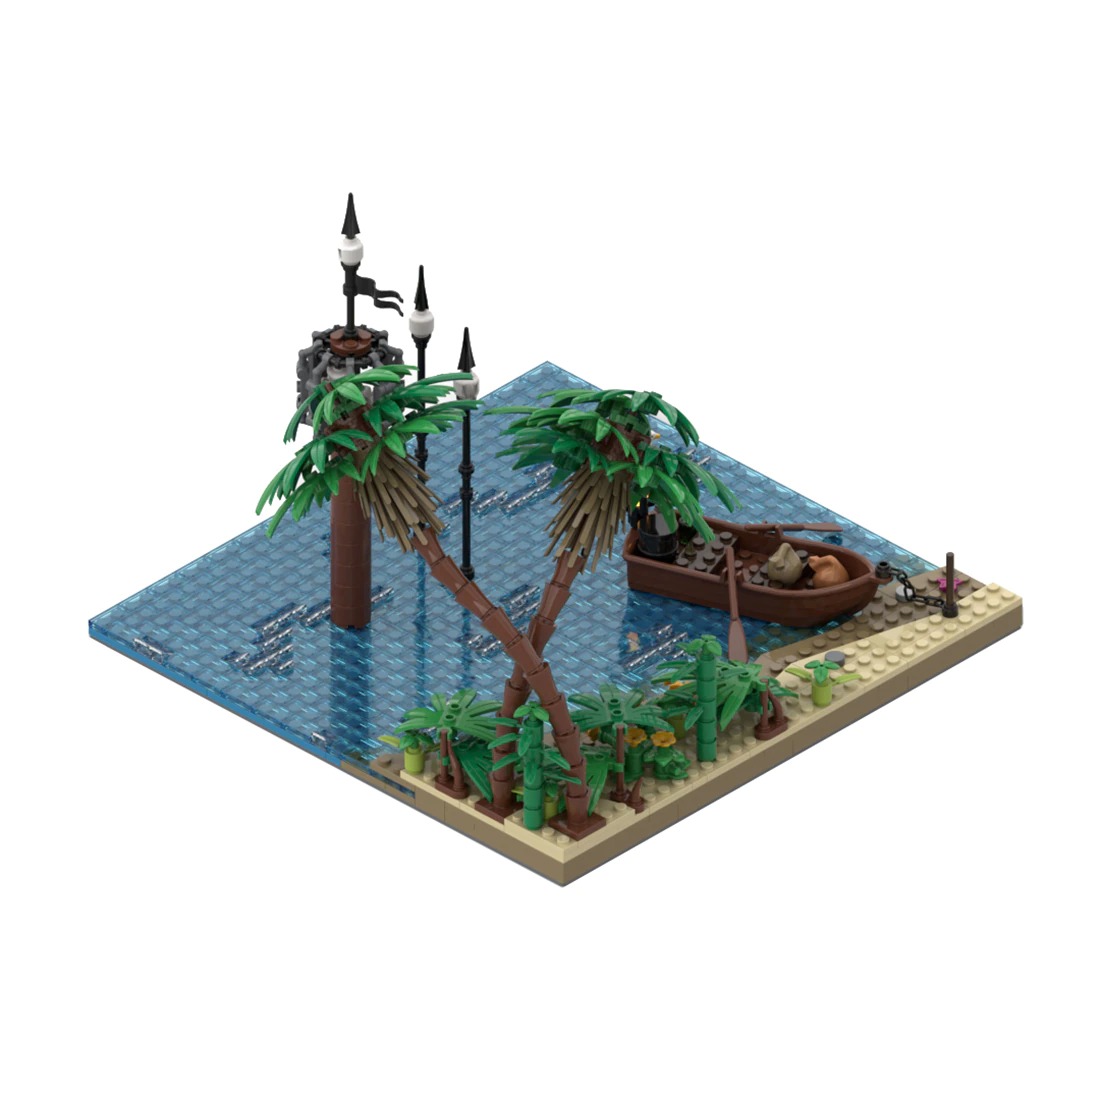 Port Sauvage: Beach with Pillory MOC-116559 Creator With 743 Pieces